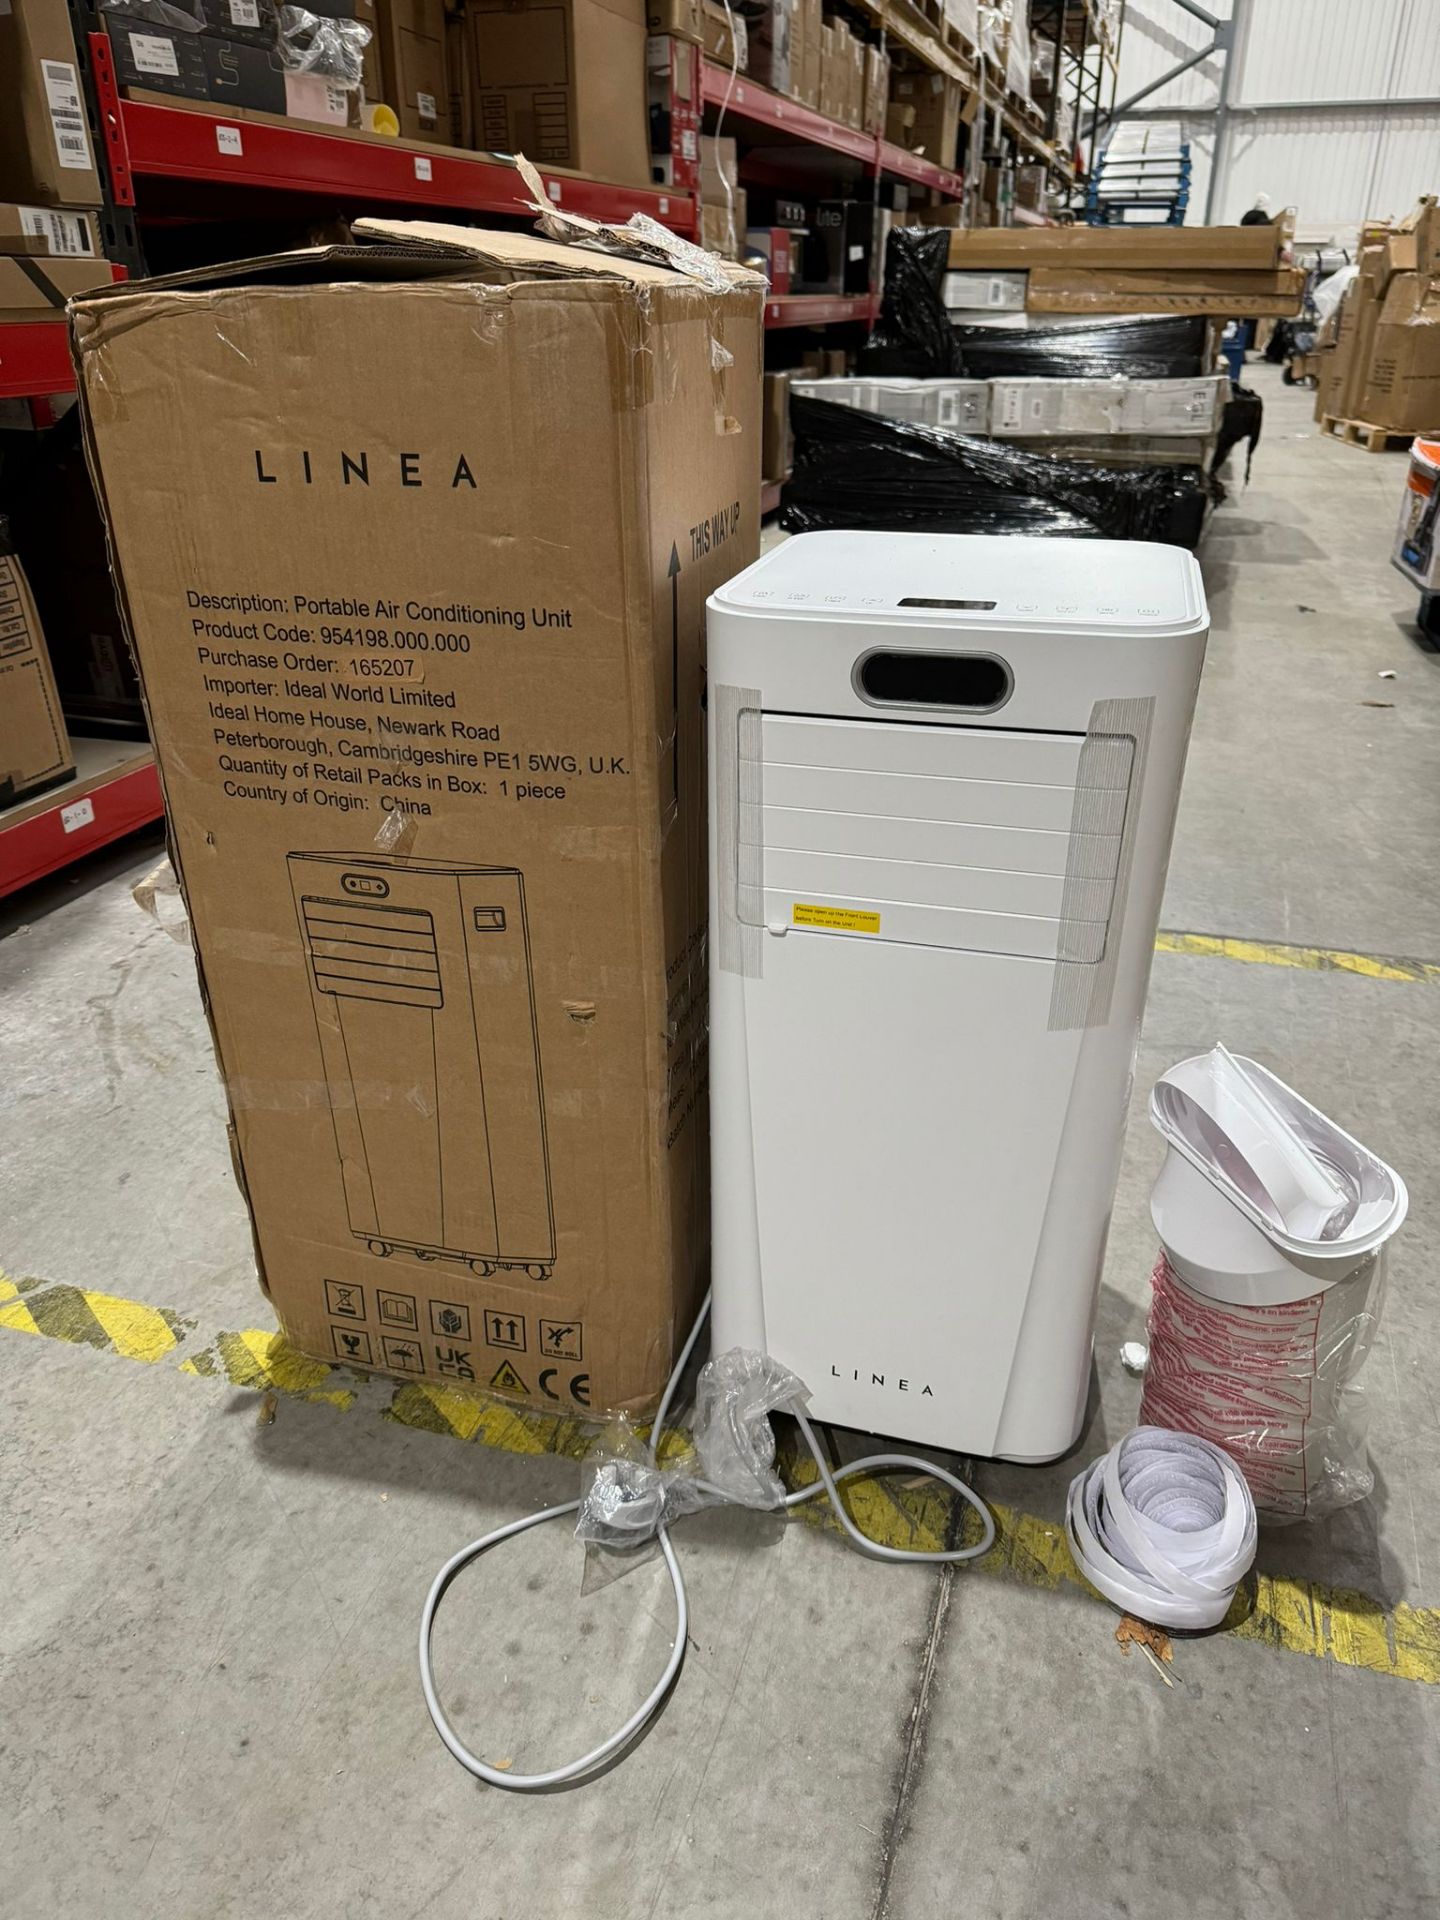 1 x LINEA Portable Air Conditioning Unit - 954198.000.000 with Window Kit - NO RESERVE - Image 3 of 8